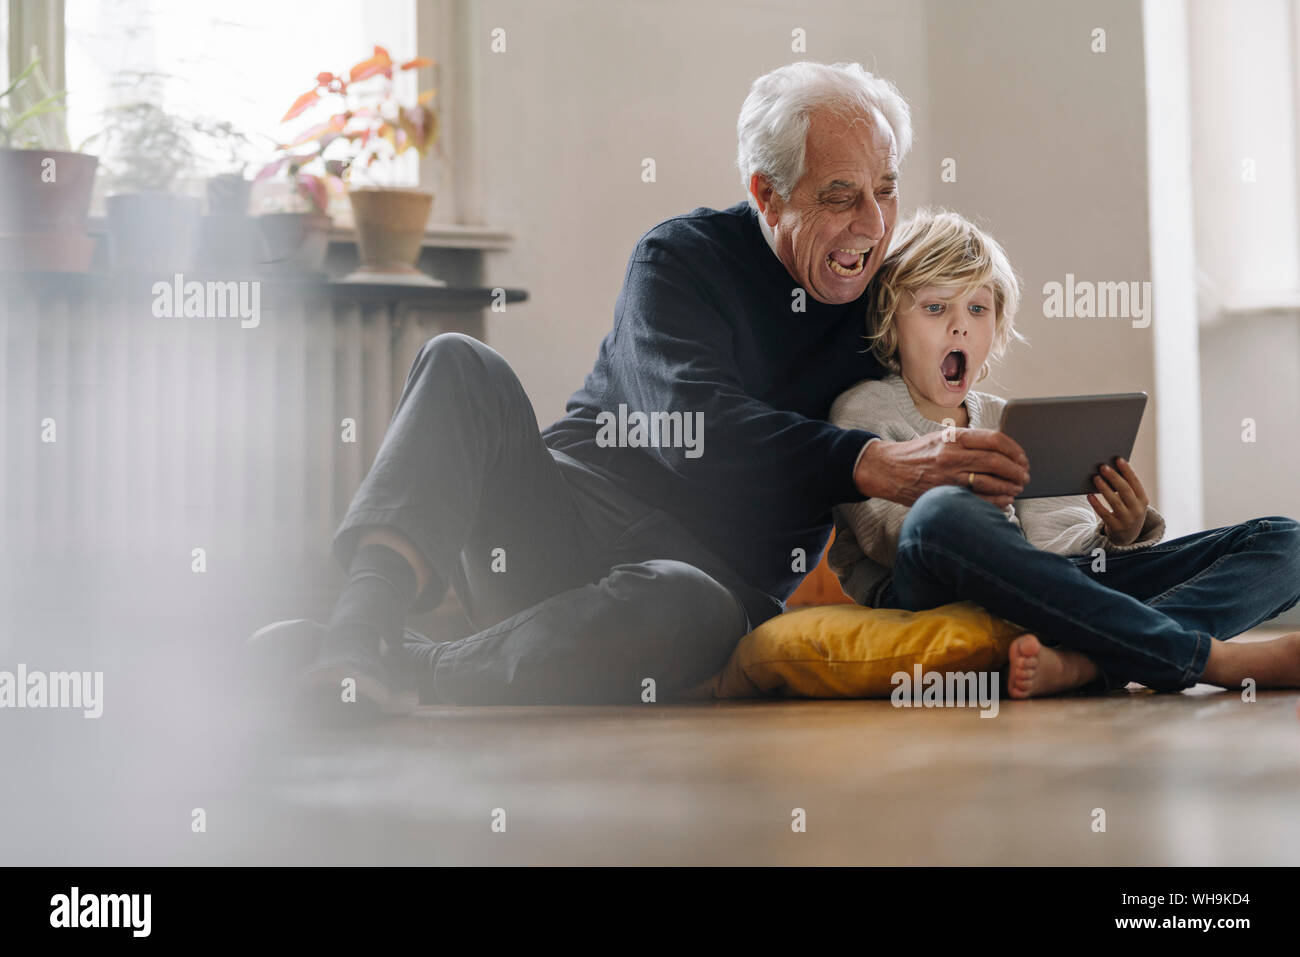 Screaming grandfather and grandson sitting on the floor at home using a tablet Stock Photo